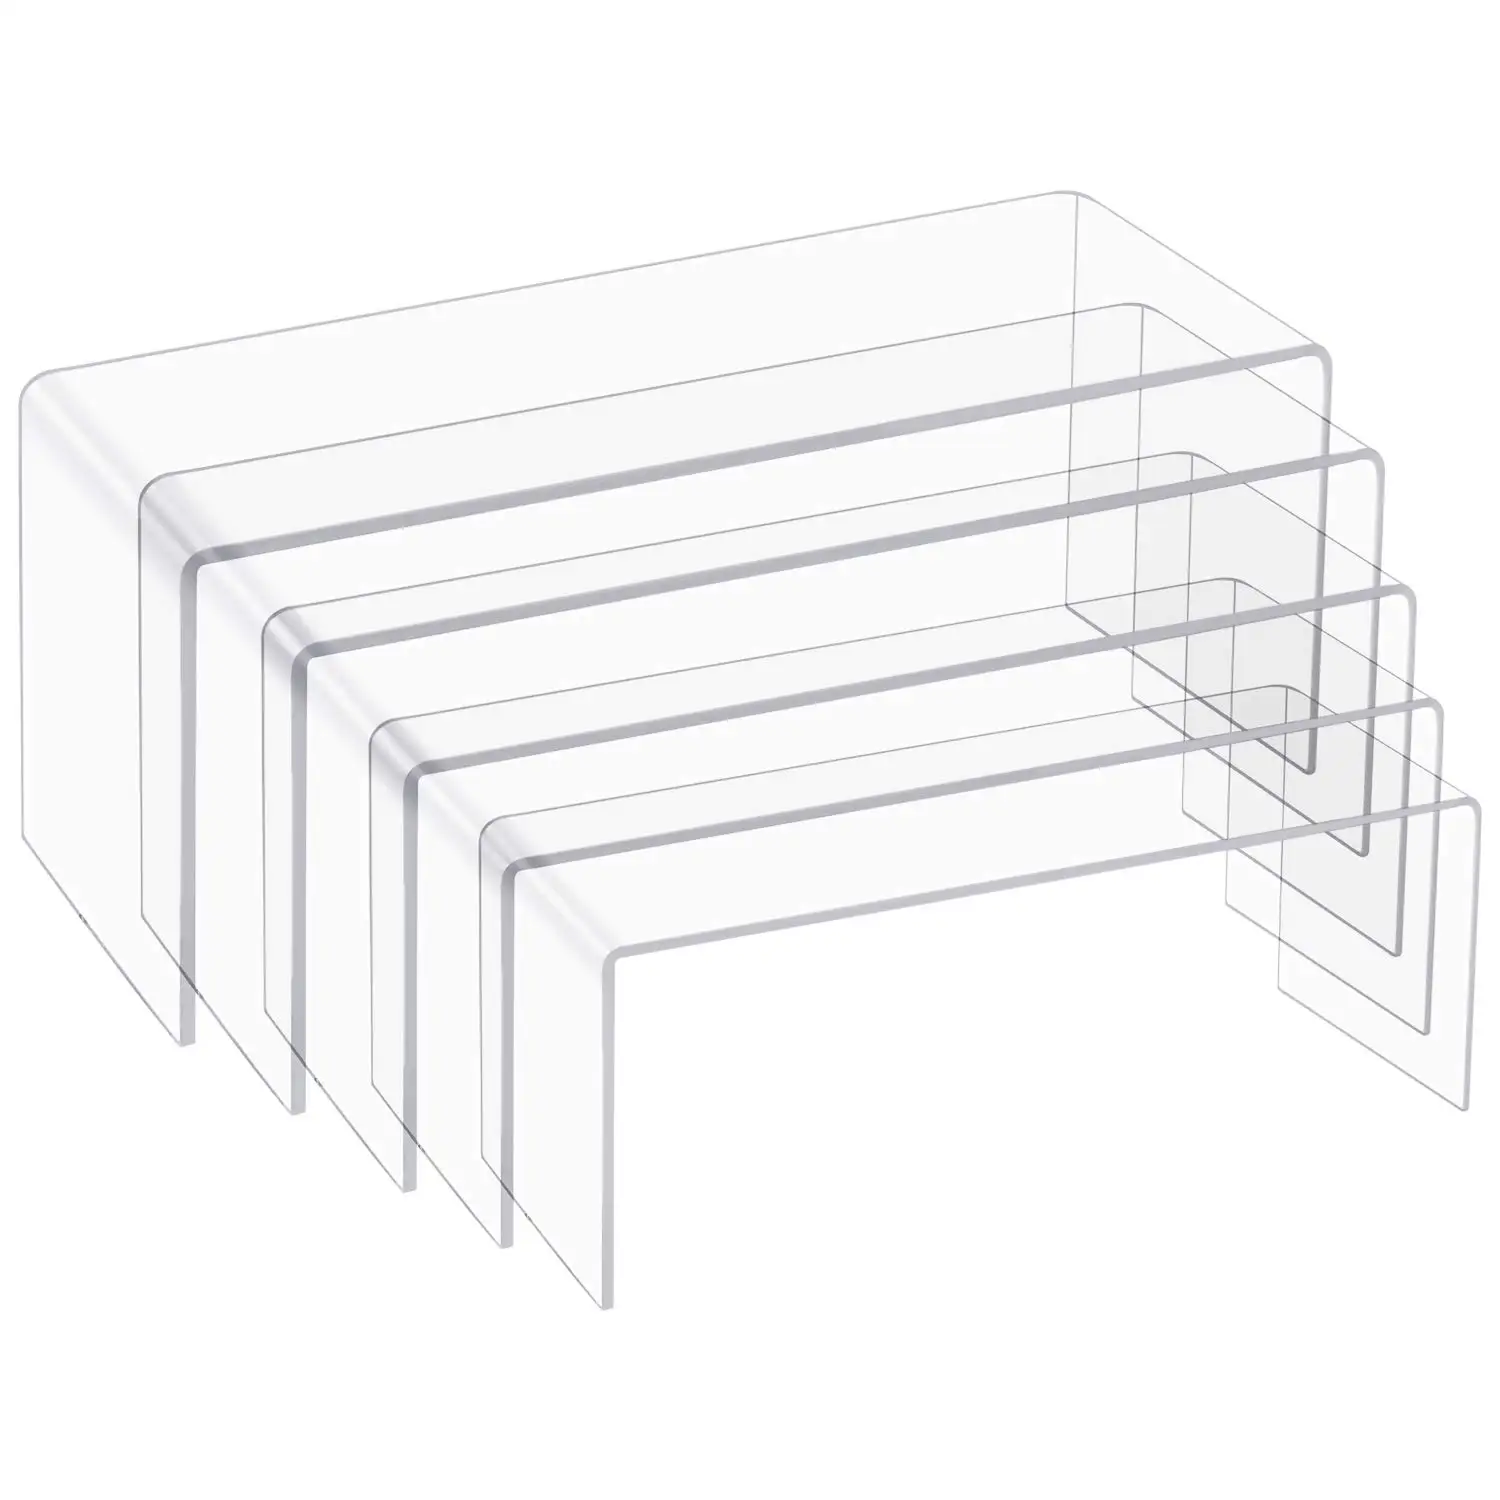 Clear Acrylic Display Stand 5Pack Clear Acrylic Display Risers Showcase Shelf Stand for Jewelry Store Equipment Display 5pcs 5 Sizes 